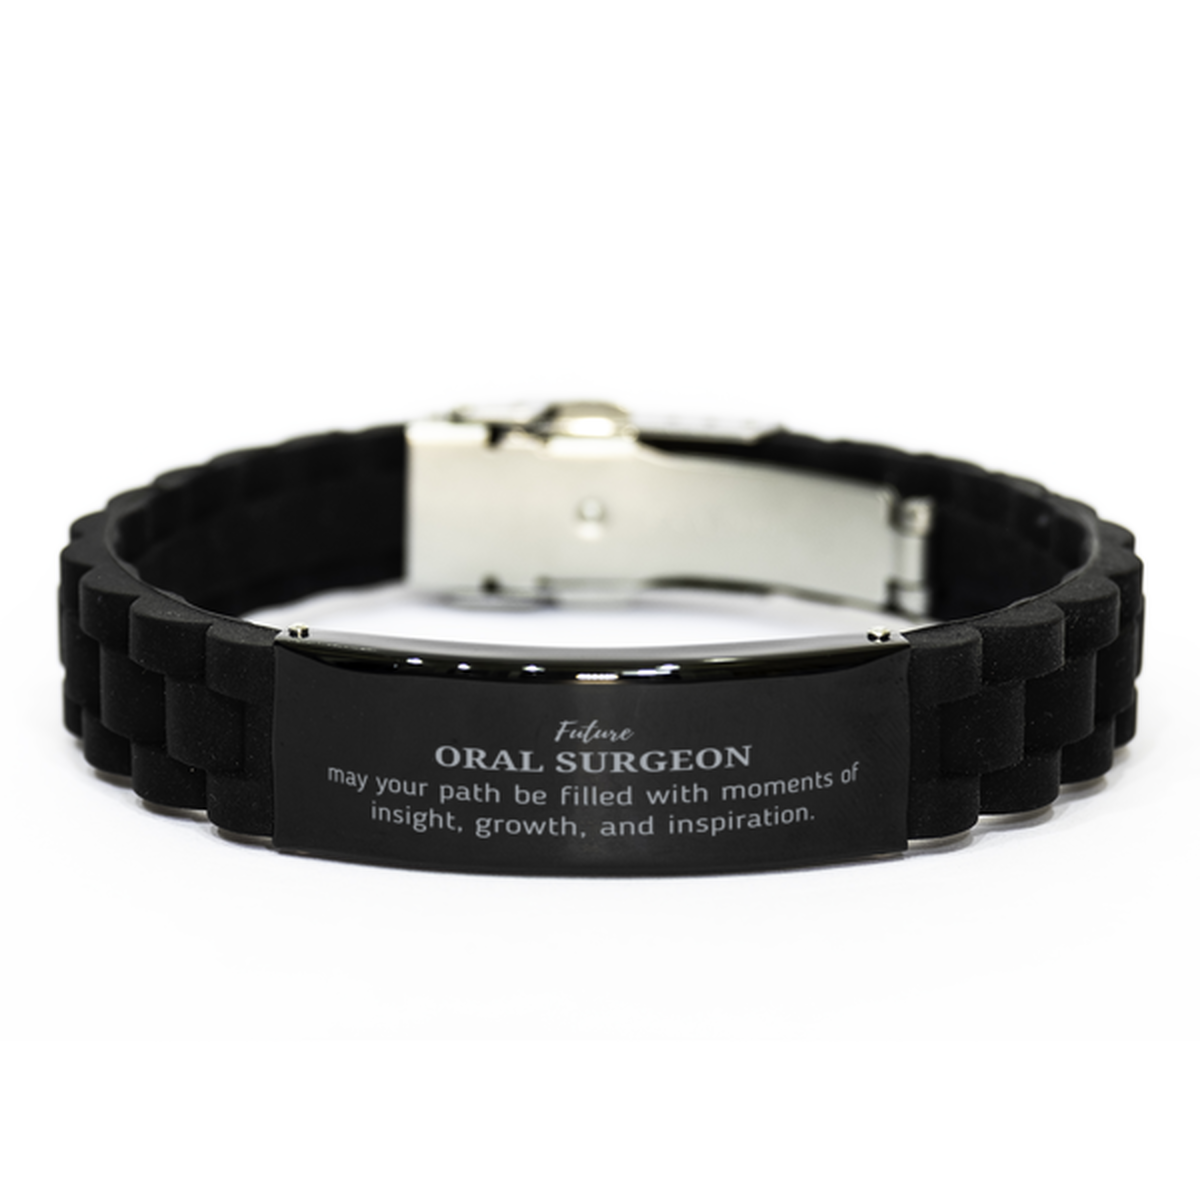 Future Oral Surgeon Gifts, May your path be filled with moments of insight, Graduation Gifts for New Oral Surgeon, Christmas Unique Black Glidelock Clasp Bracelet For Men, Women, Friends